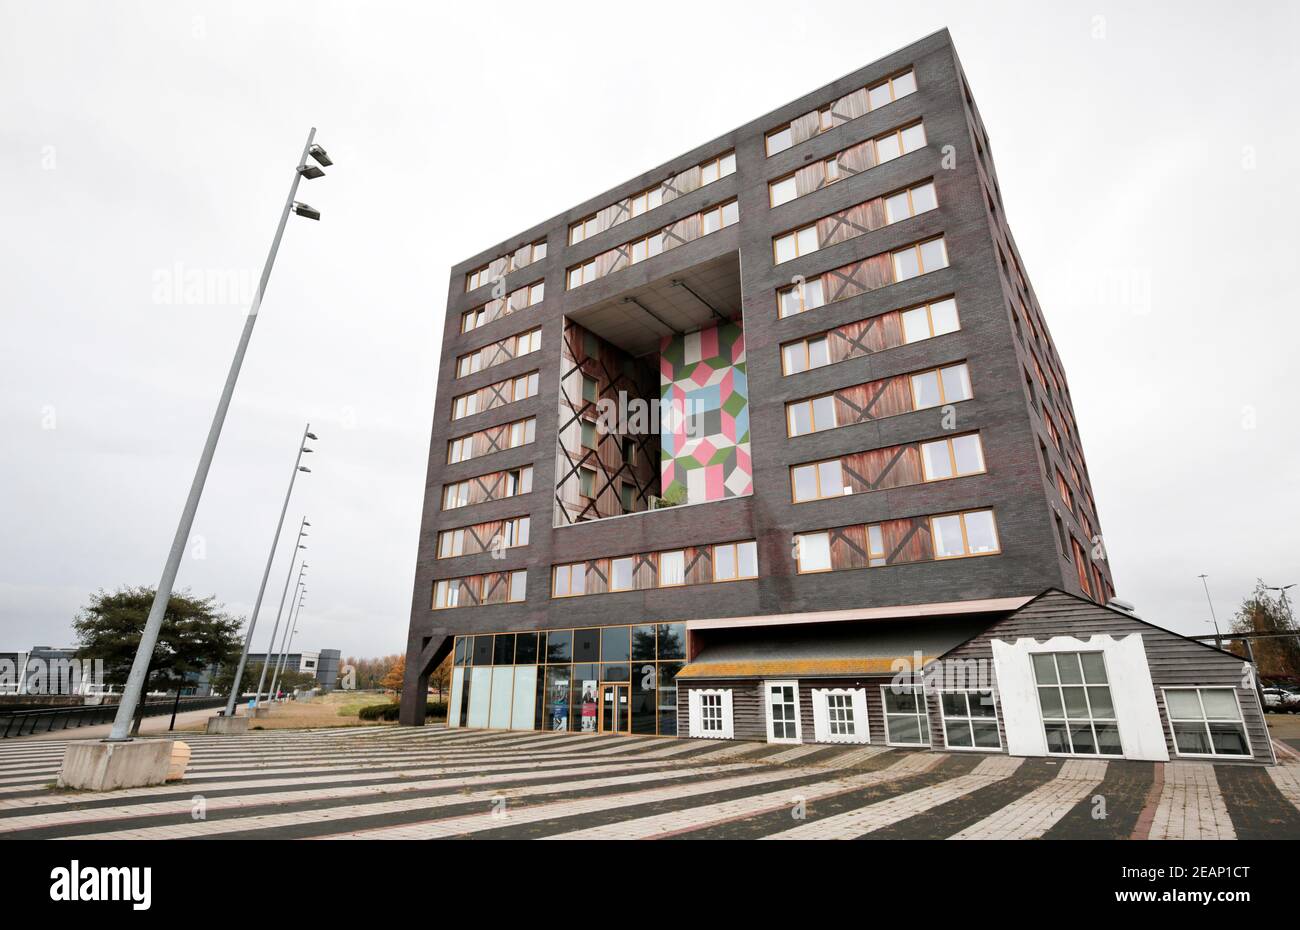 The timber-cladded CIAC building in Middlesbrough, North Yorkshire, UK. 2/11/2019. Photograph: Stuart Boulton. Stock Photo